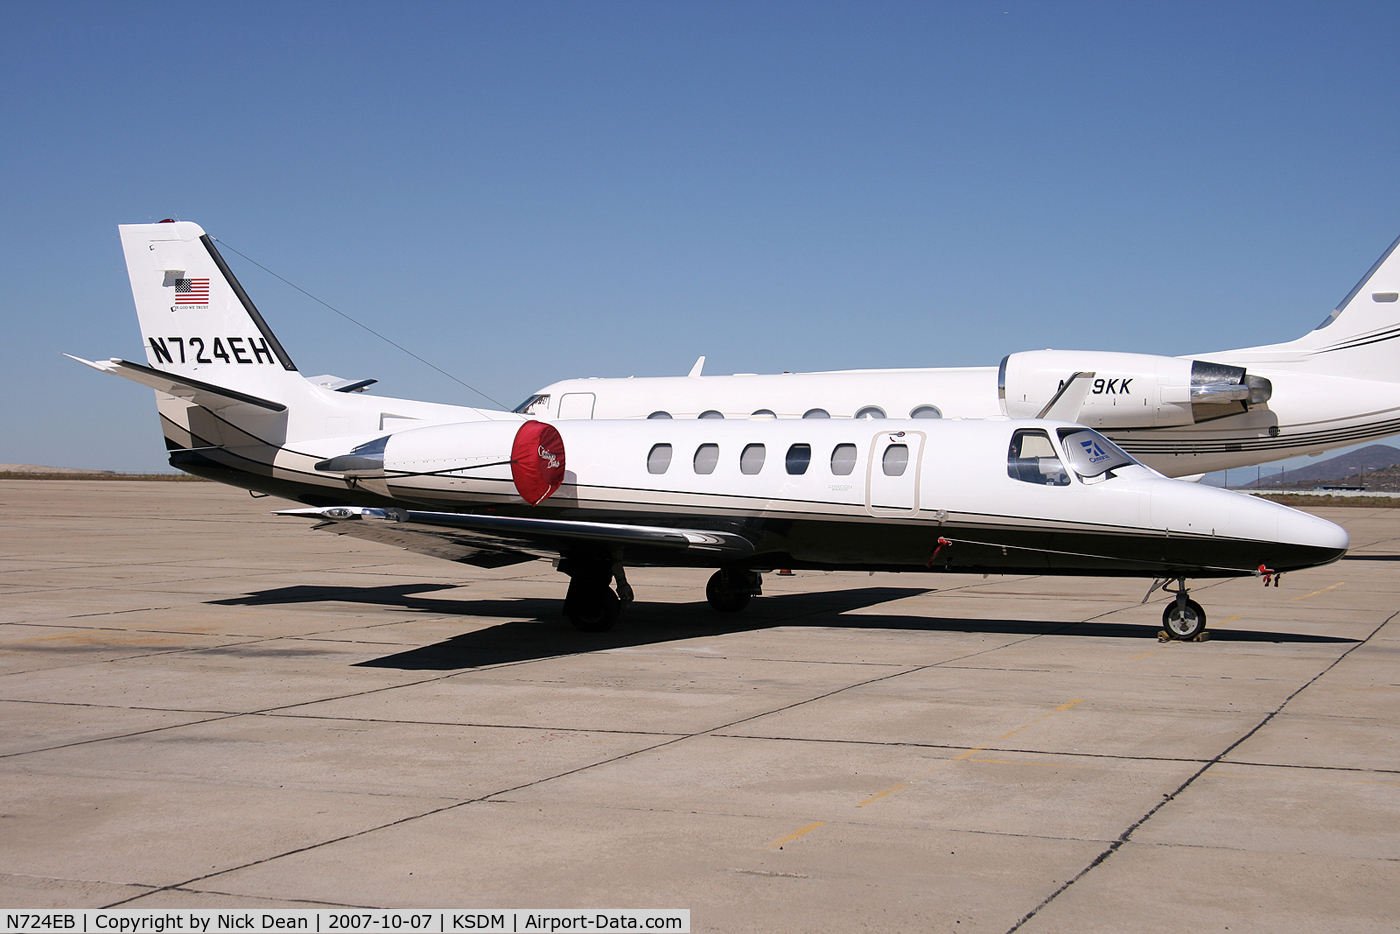 N724EB, 2005 Cessna 550 C/N 550-1113, KSDM (Seen here as N724EH this aircraft is currently registered N724EB as posted)